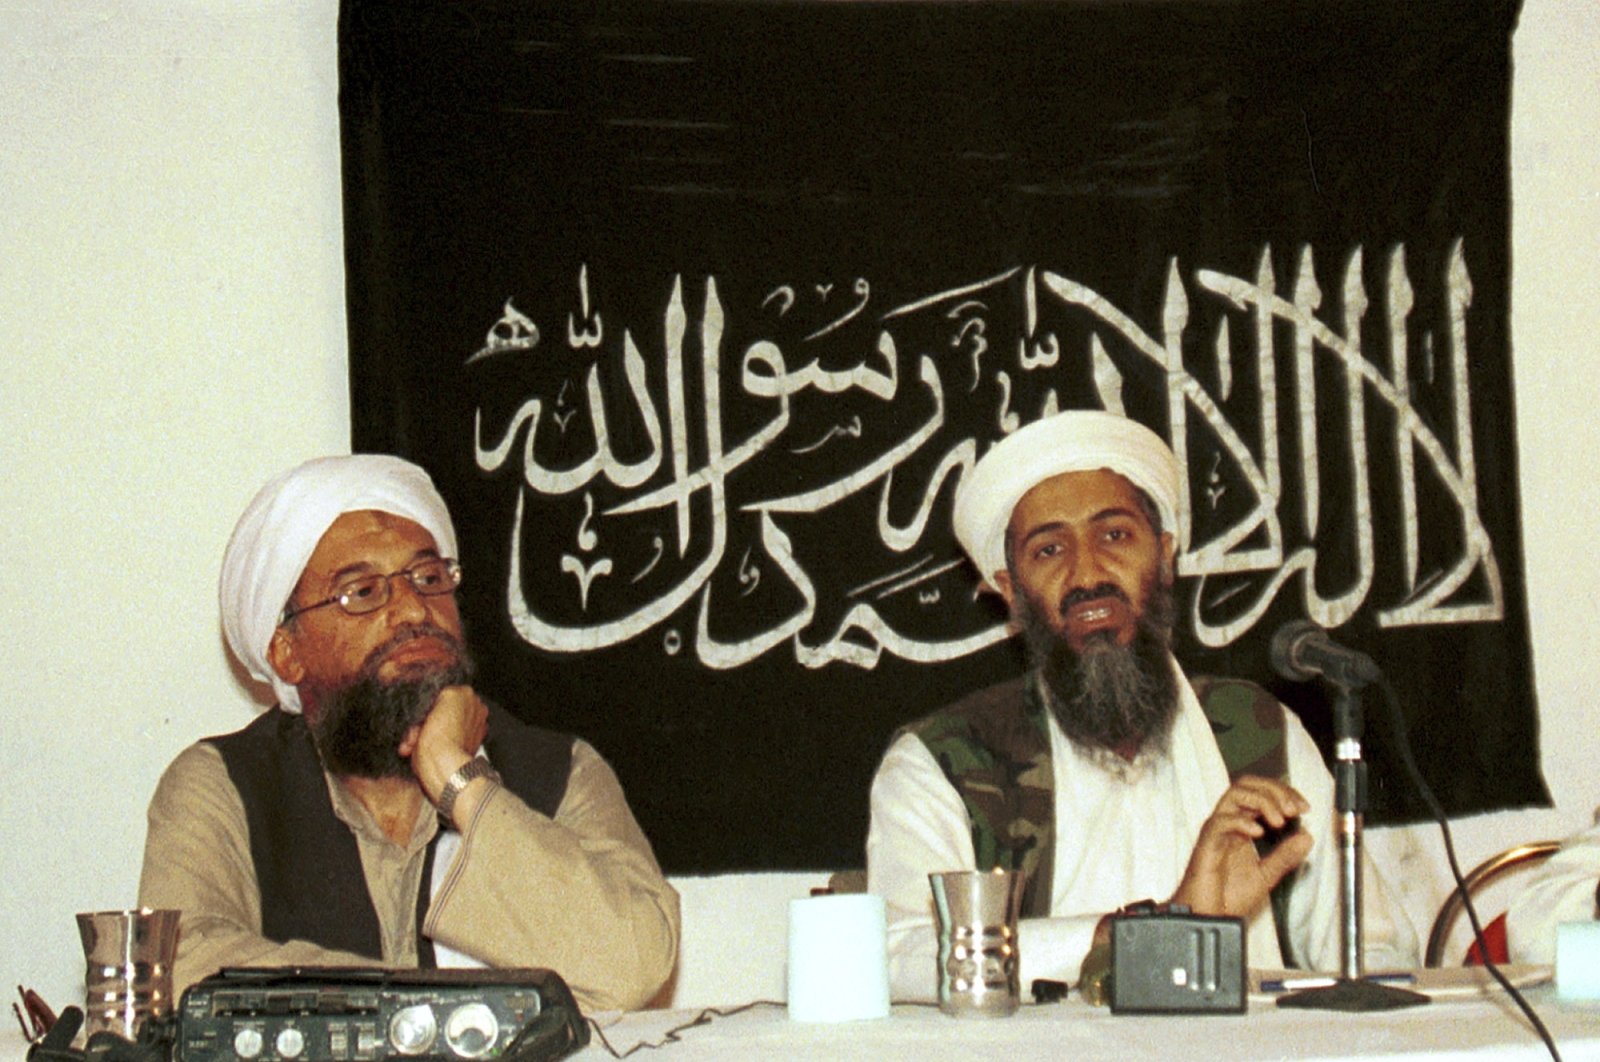 In this 1998 file photo made available March 19, 2004, Ayman al-Zawahri (L) listens during a news conference with Osama bin Laden in Khost, Afghanistan. (AP Photo)